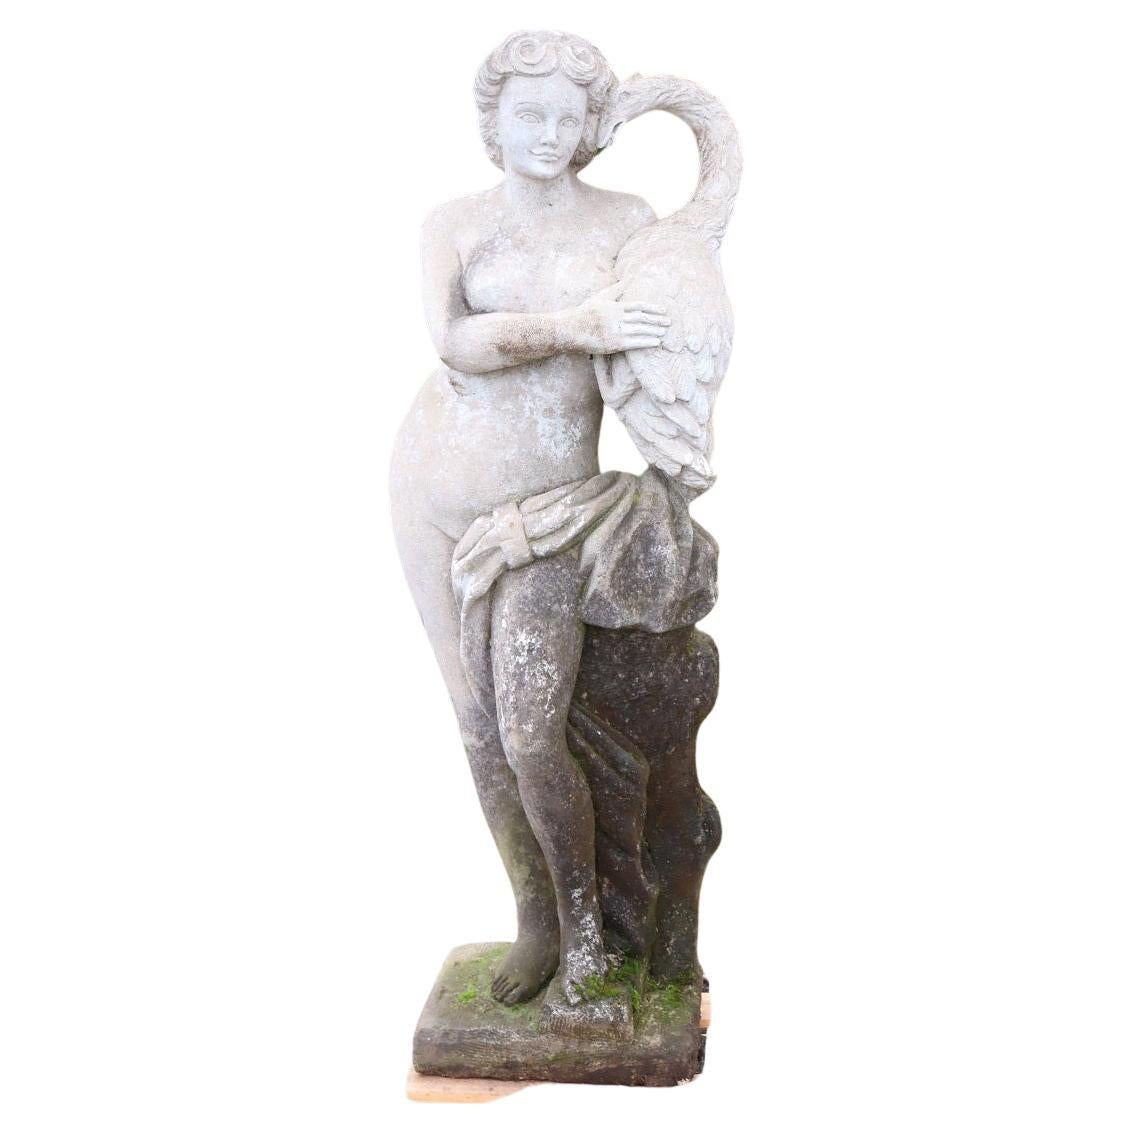 Early 20th Century Italian Large Garden Statue "Leda and the Swan"